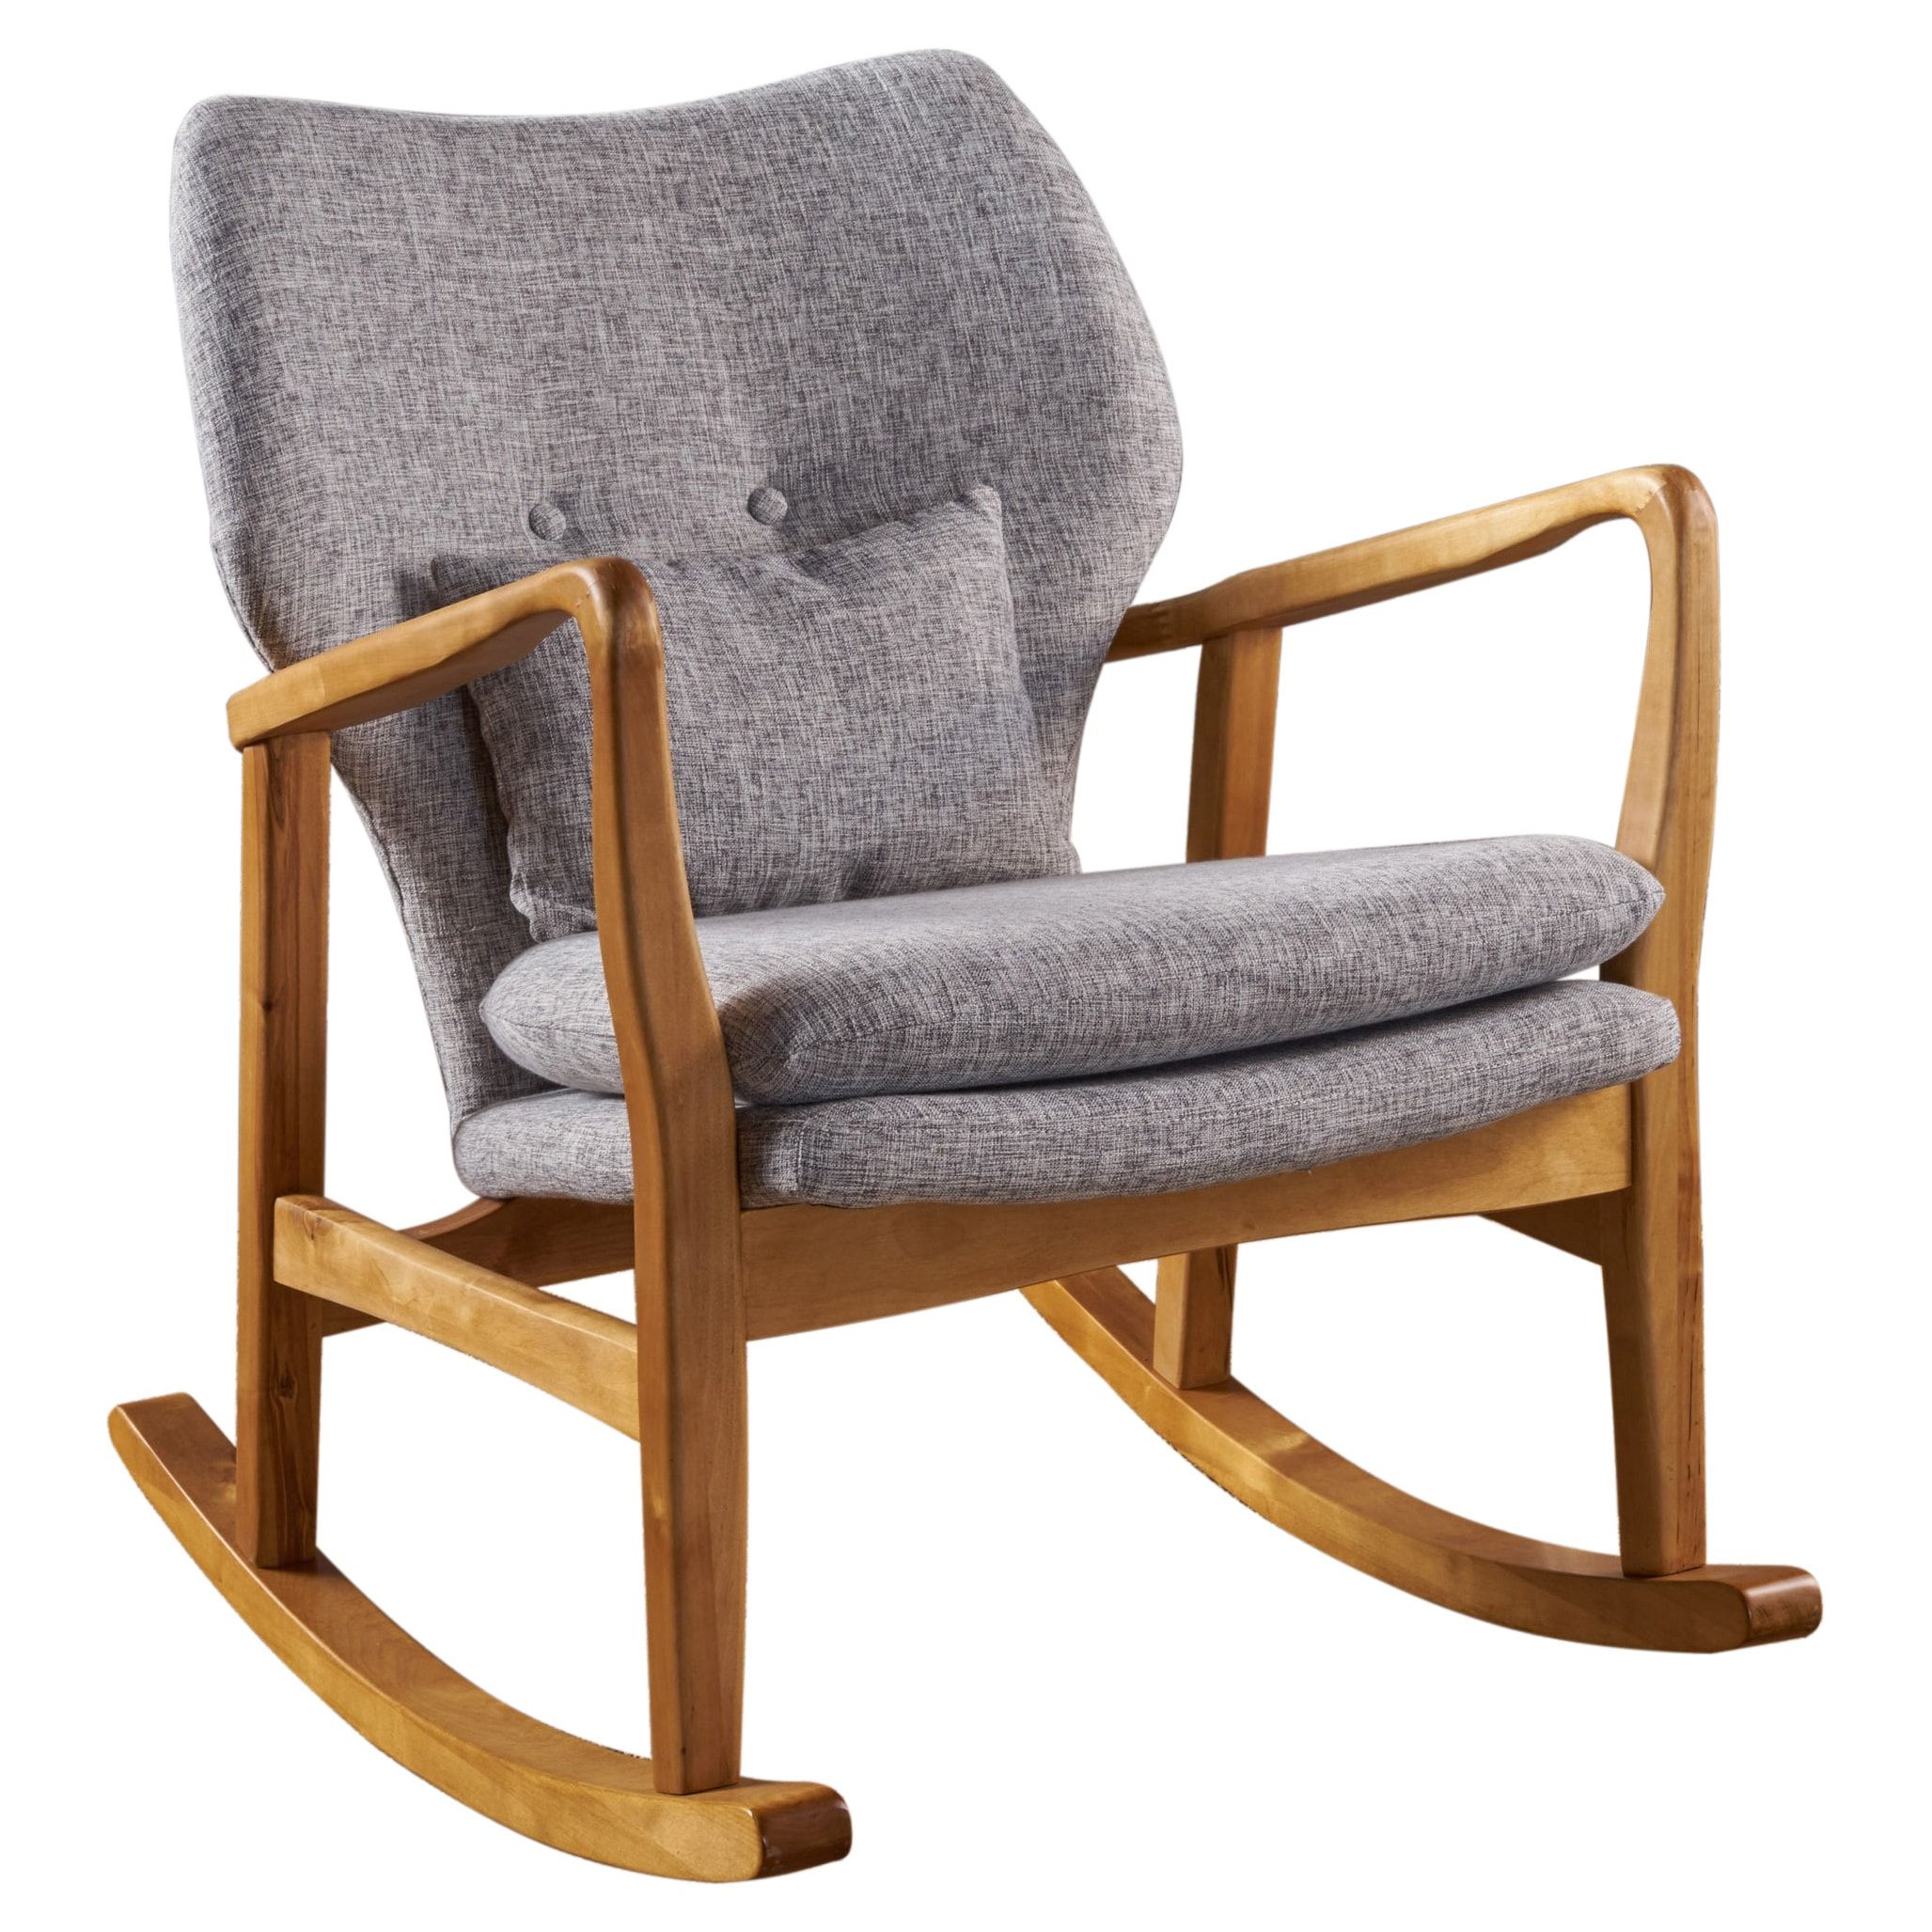 Christopher Knight Home Benny Mid Century Modern Fabric Rocking Chair By Intended For Mid Century Modern Fabric Rocking Chairs (View 6 of 20)